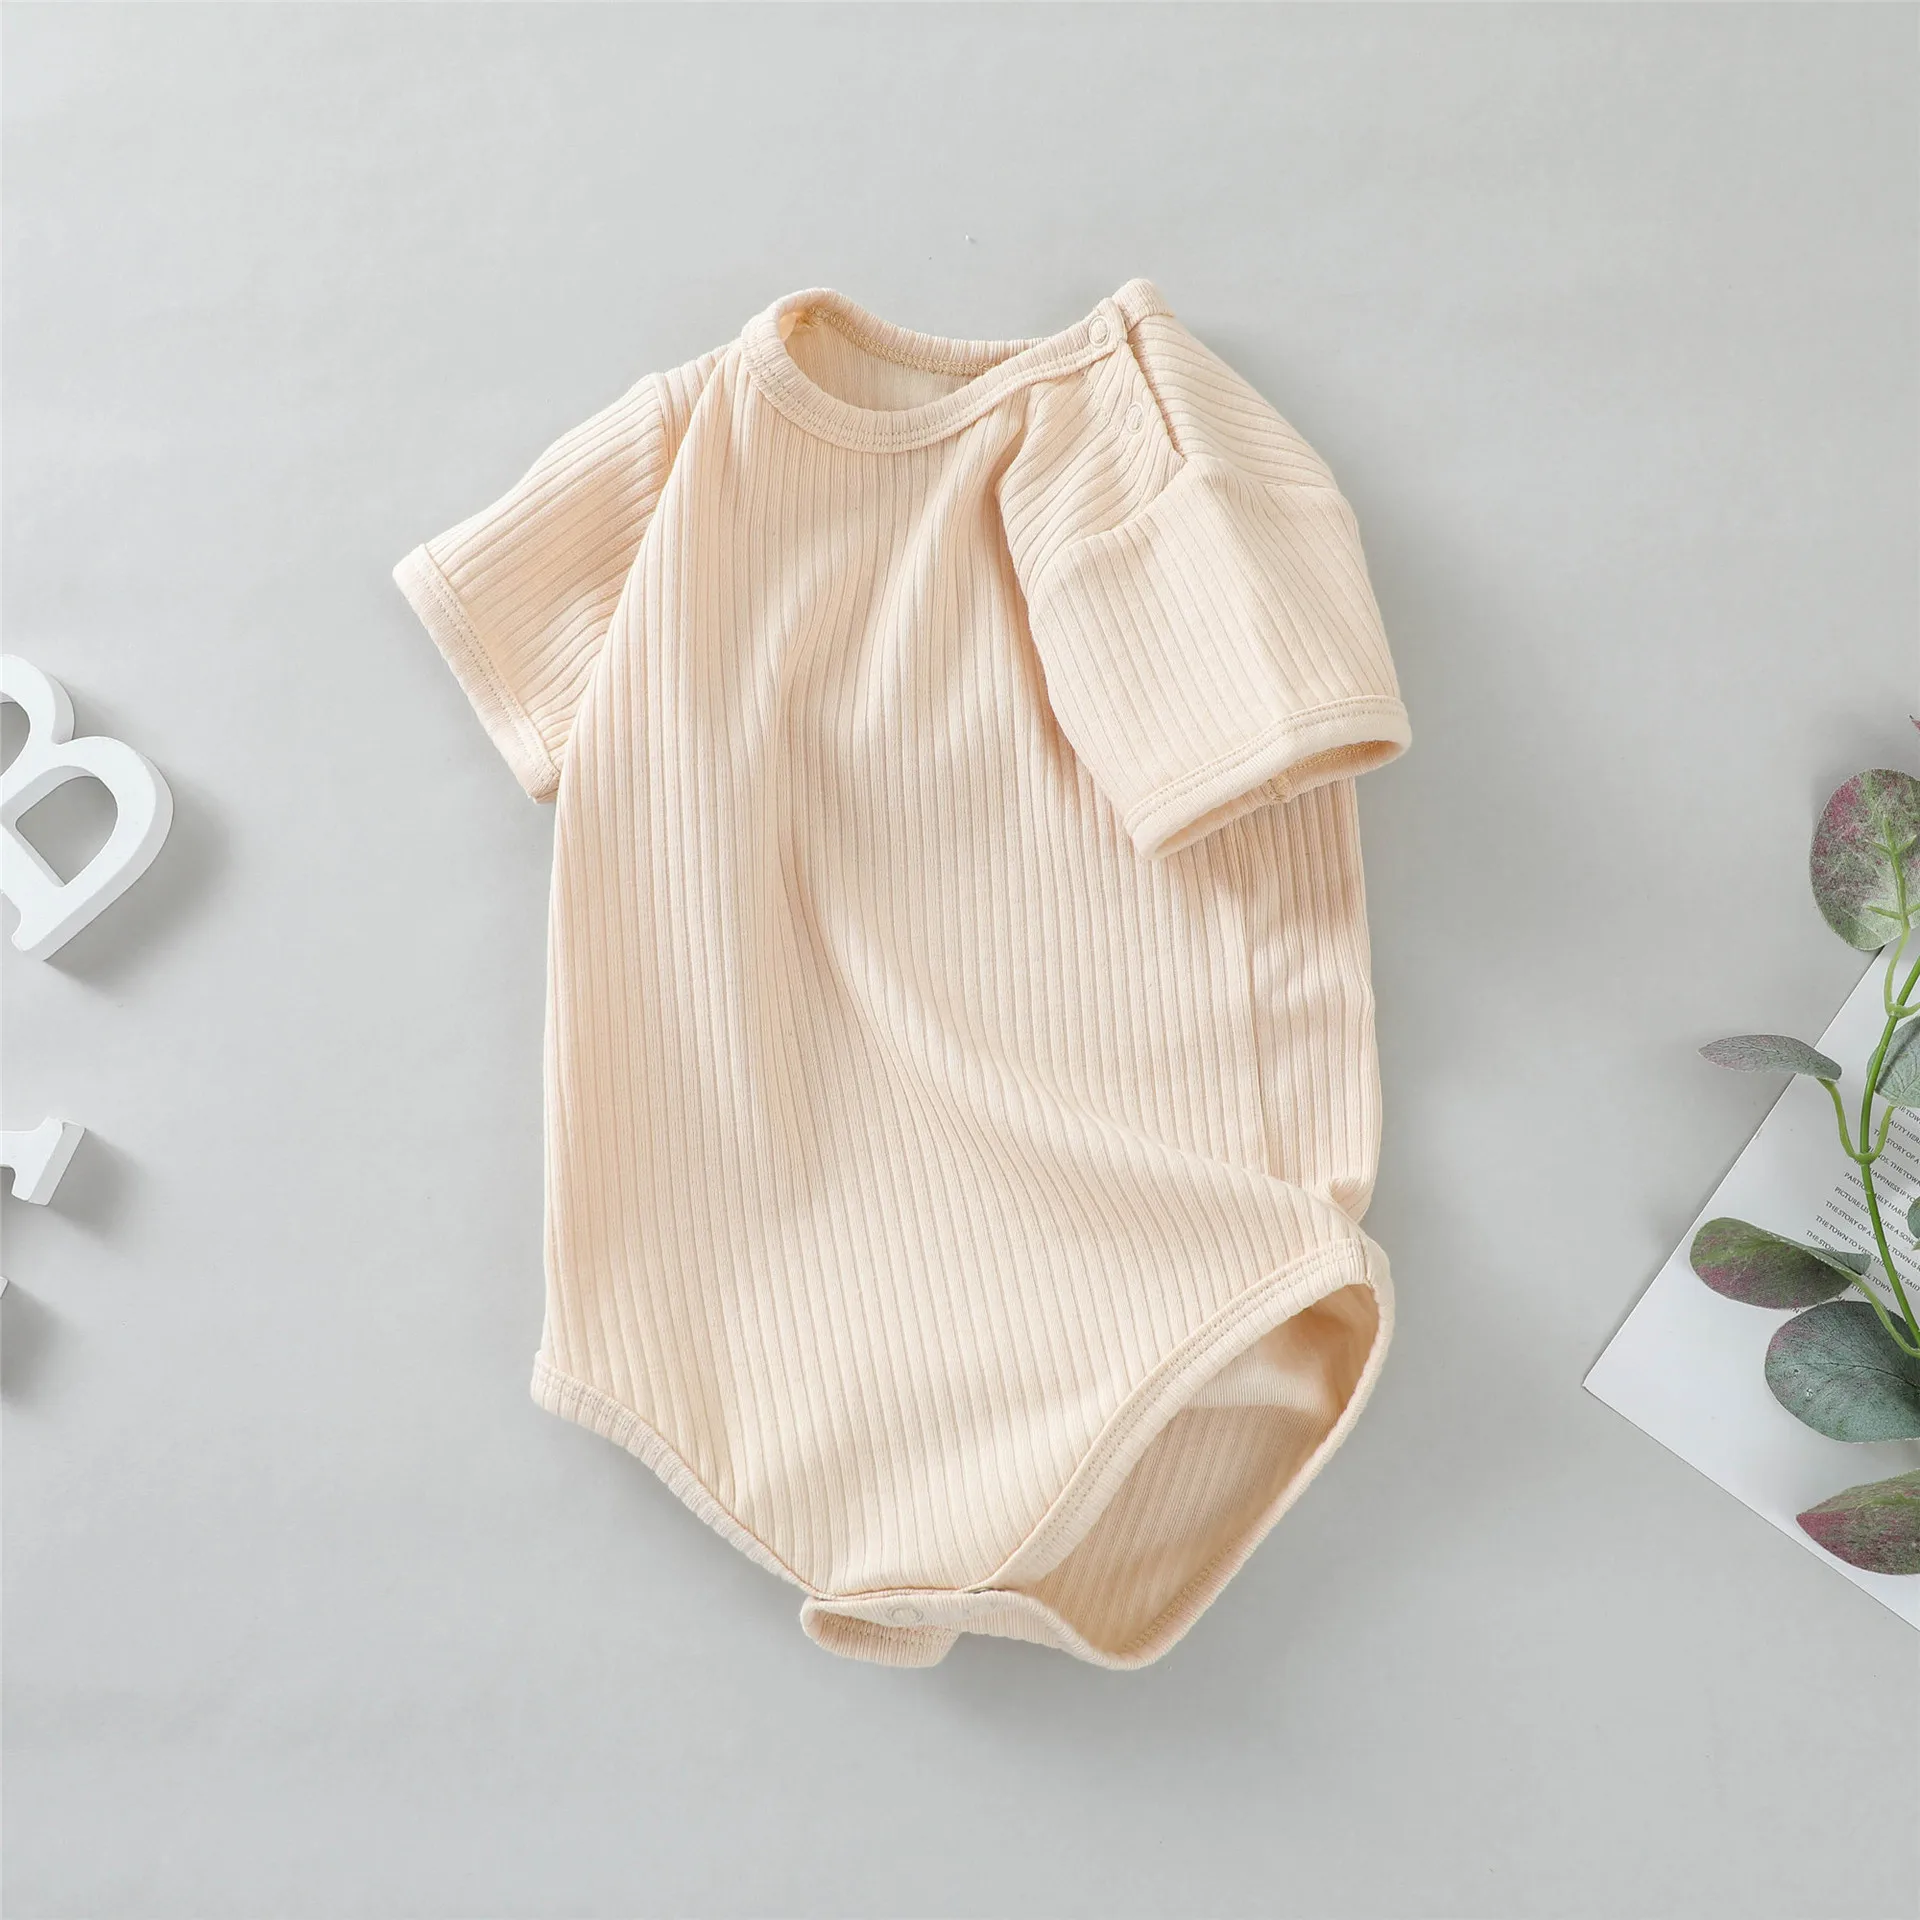 Newborn Baby Boy Girl High Quality Cotton Soft Short Sleeve Casual Solid White Romper Jumpsuit Outfits Climb Clothes 0-24M Ropa